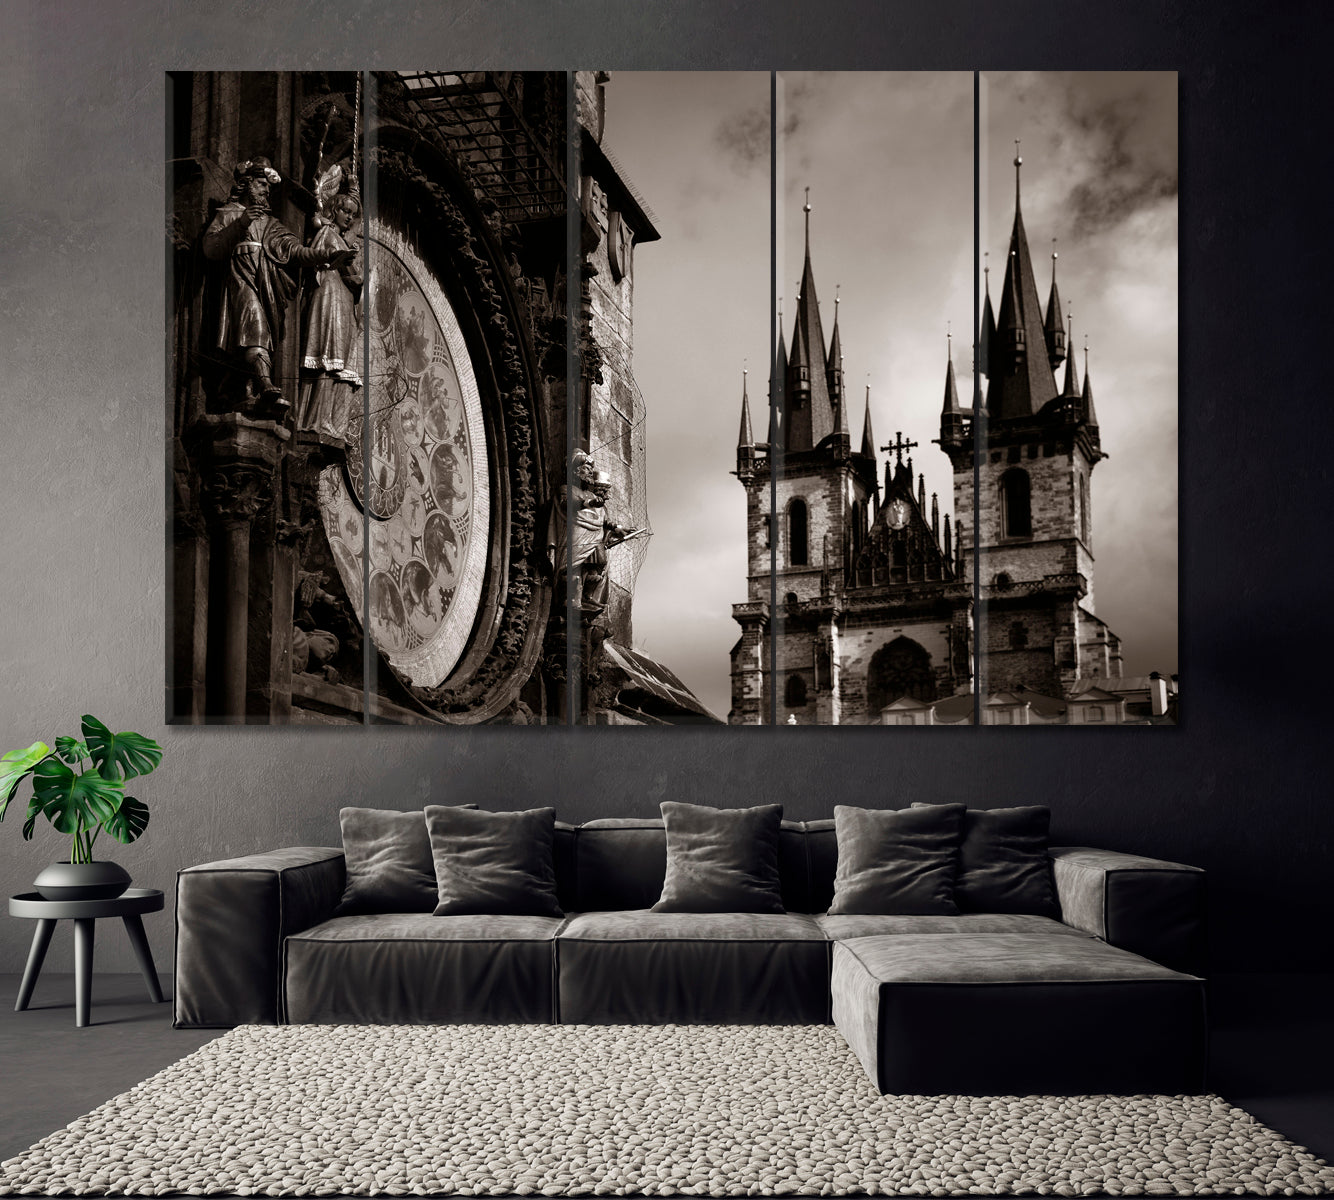 Astronomical Clock Old Town Square Prague Canvas Print ArtLexy 5 Panels 36"x24" inches 